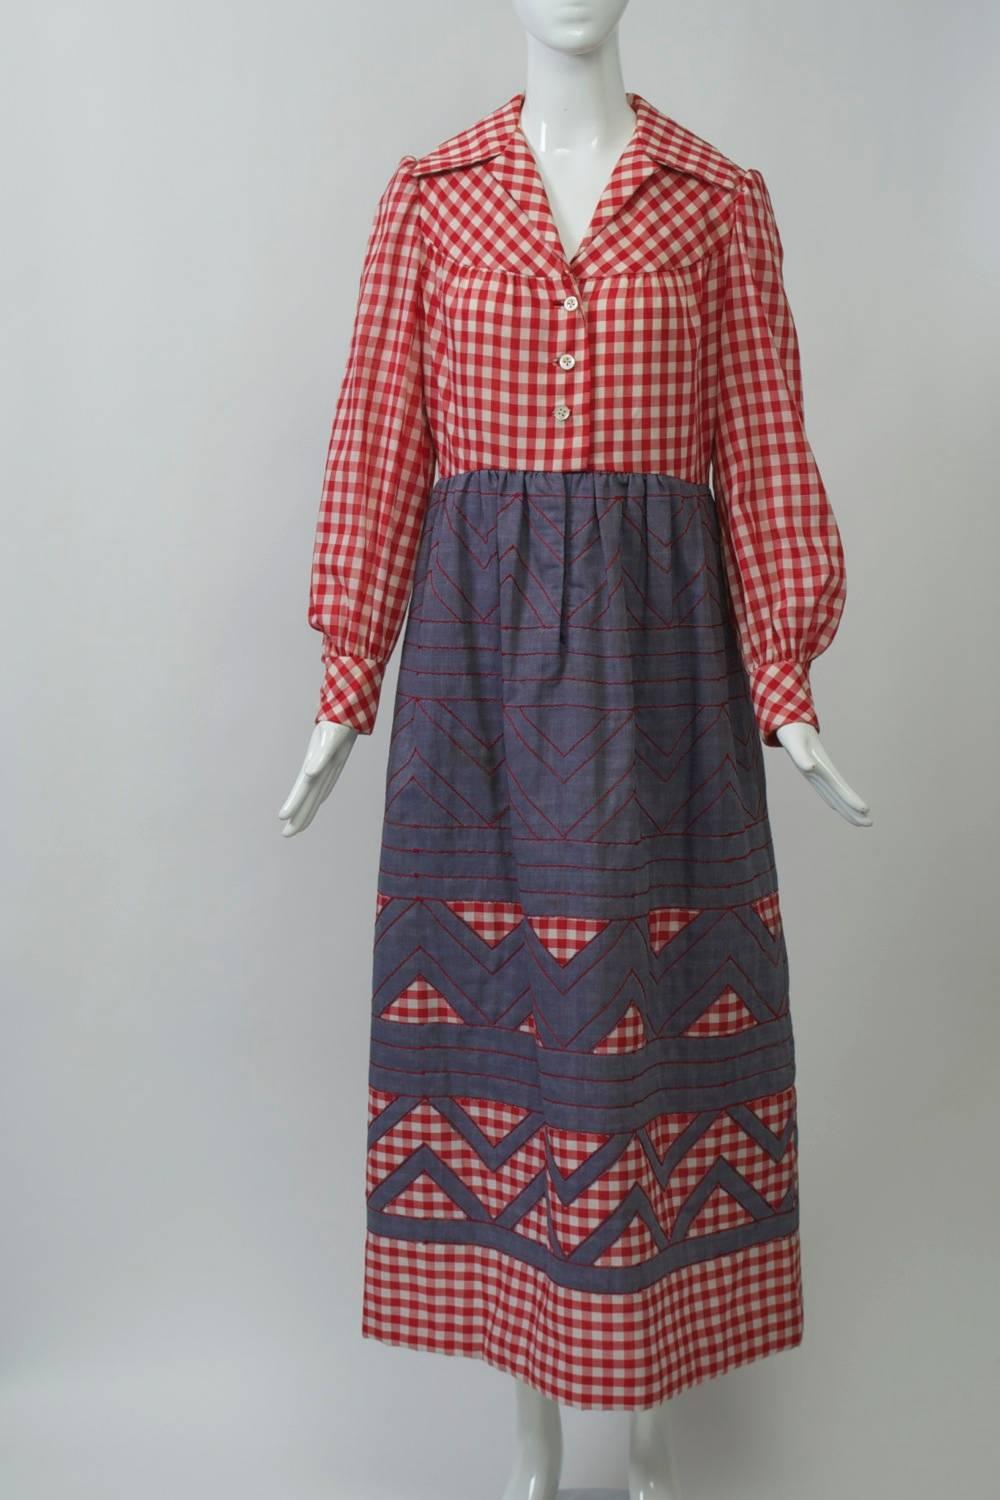 1970s maxi dress, its shirt-style, high-waisted bodice in red and white gingham checks with wide collar and yoke. Below is a denim-colored cotton skirt, its top half featuring red stitching in a banded and zigzag pattern, which is repeated as